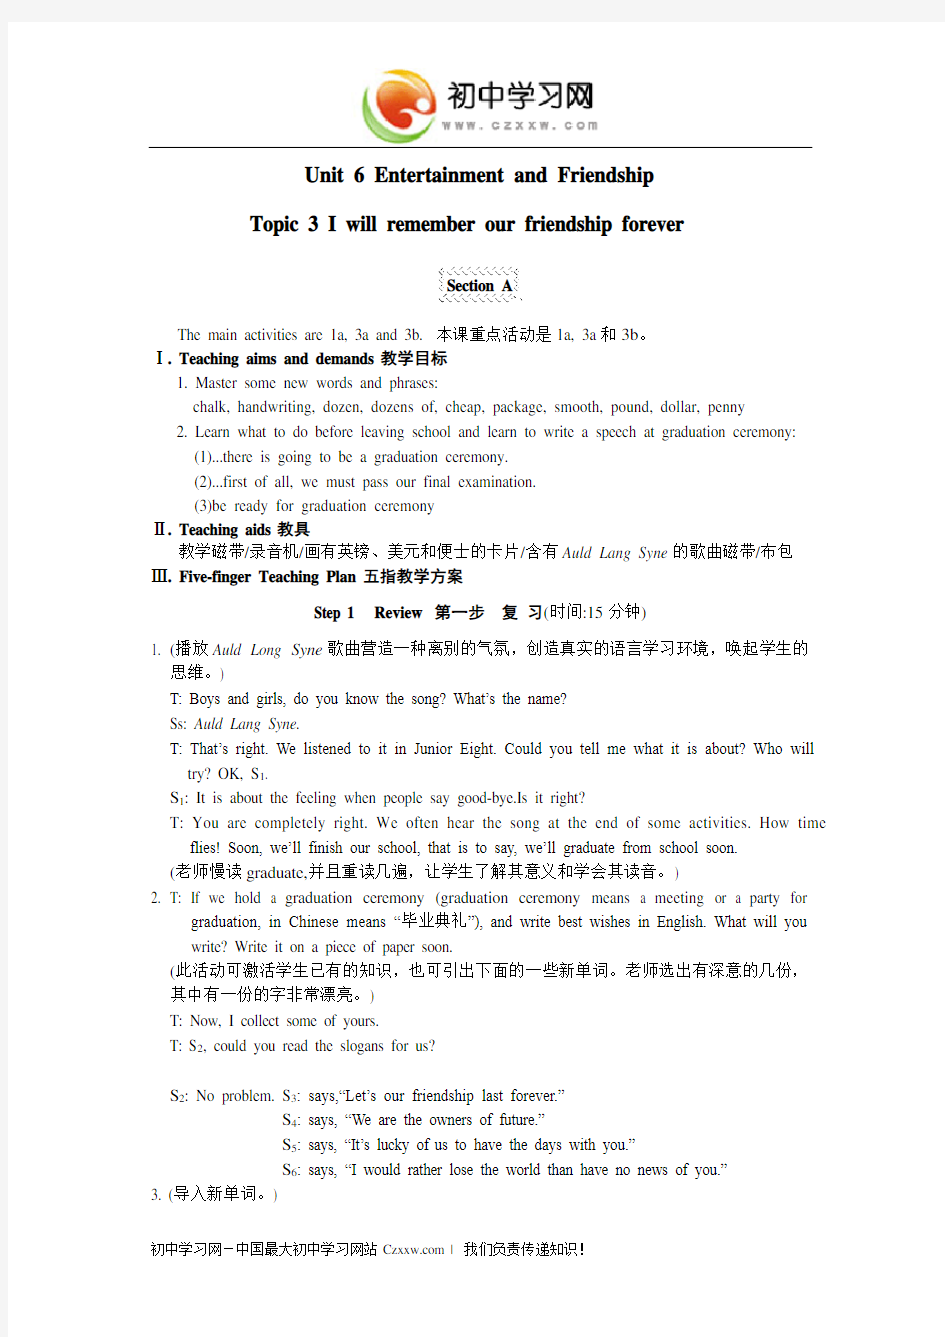 Unit 6 Topic 3 (I will remember our friendship forever)教案1(仁爱英语九年级下)